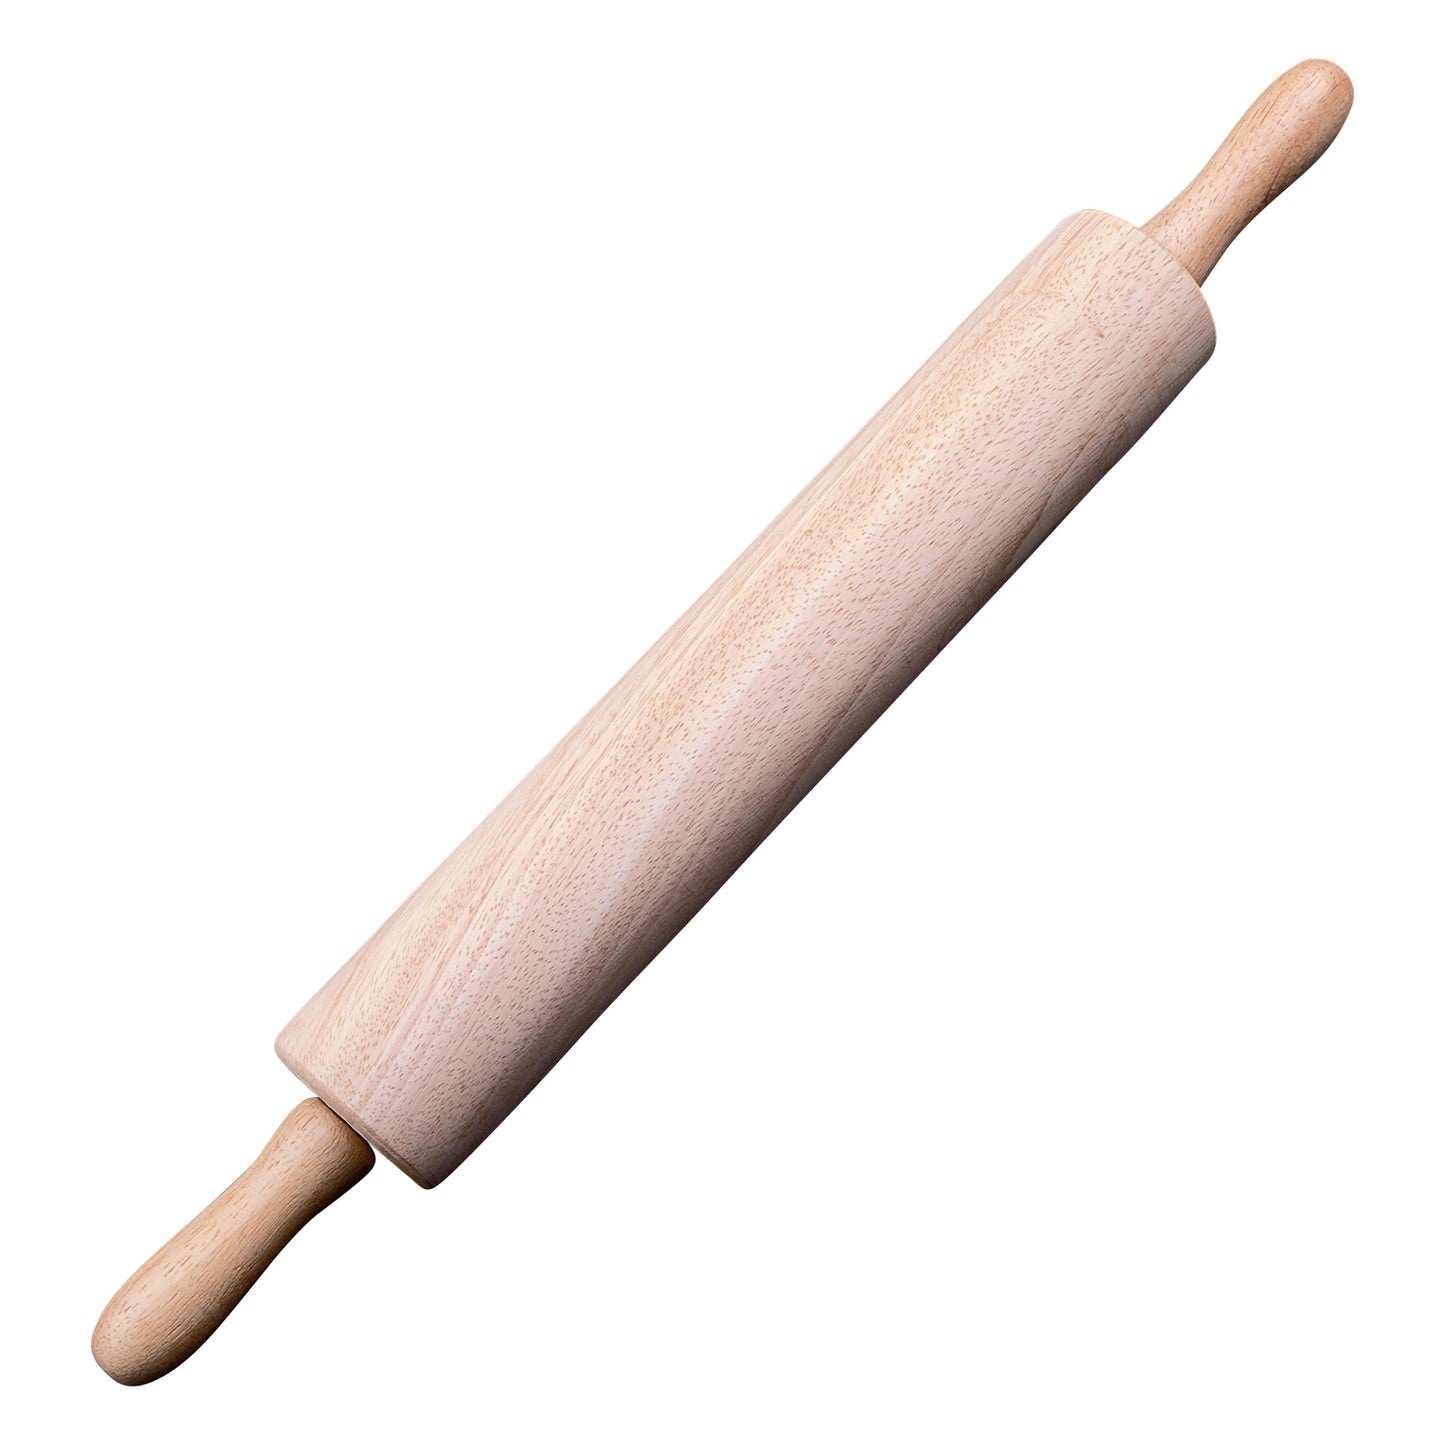 WRP-15 - Wooden Rolling Pin - 15"